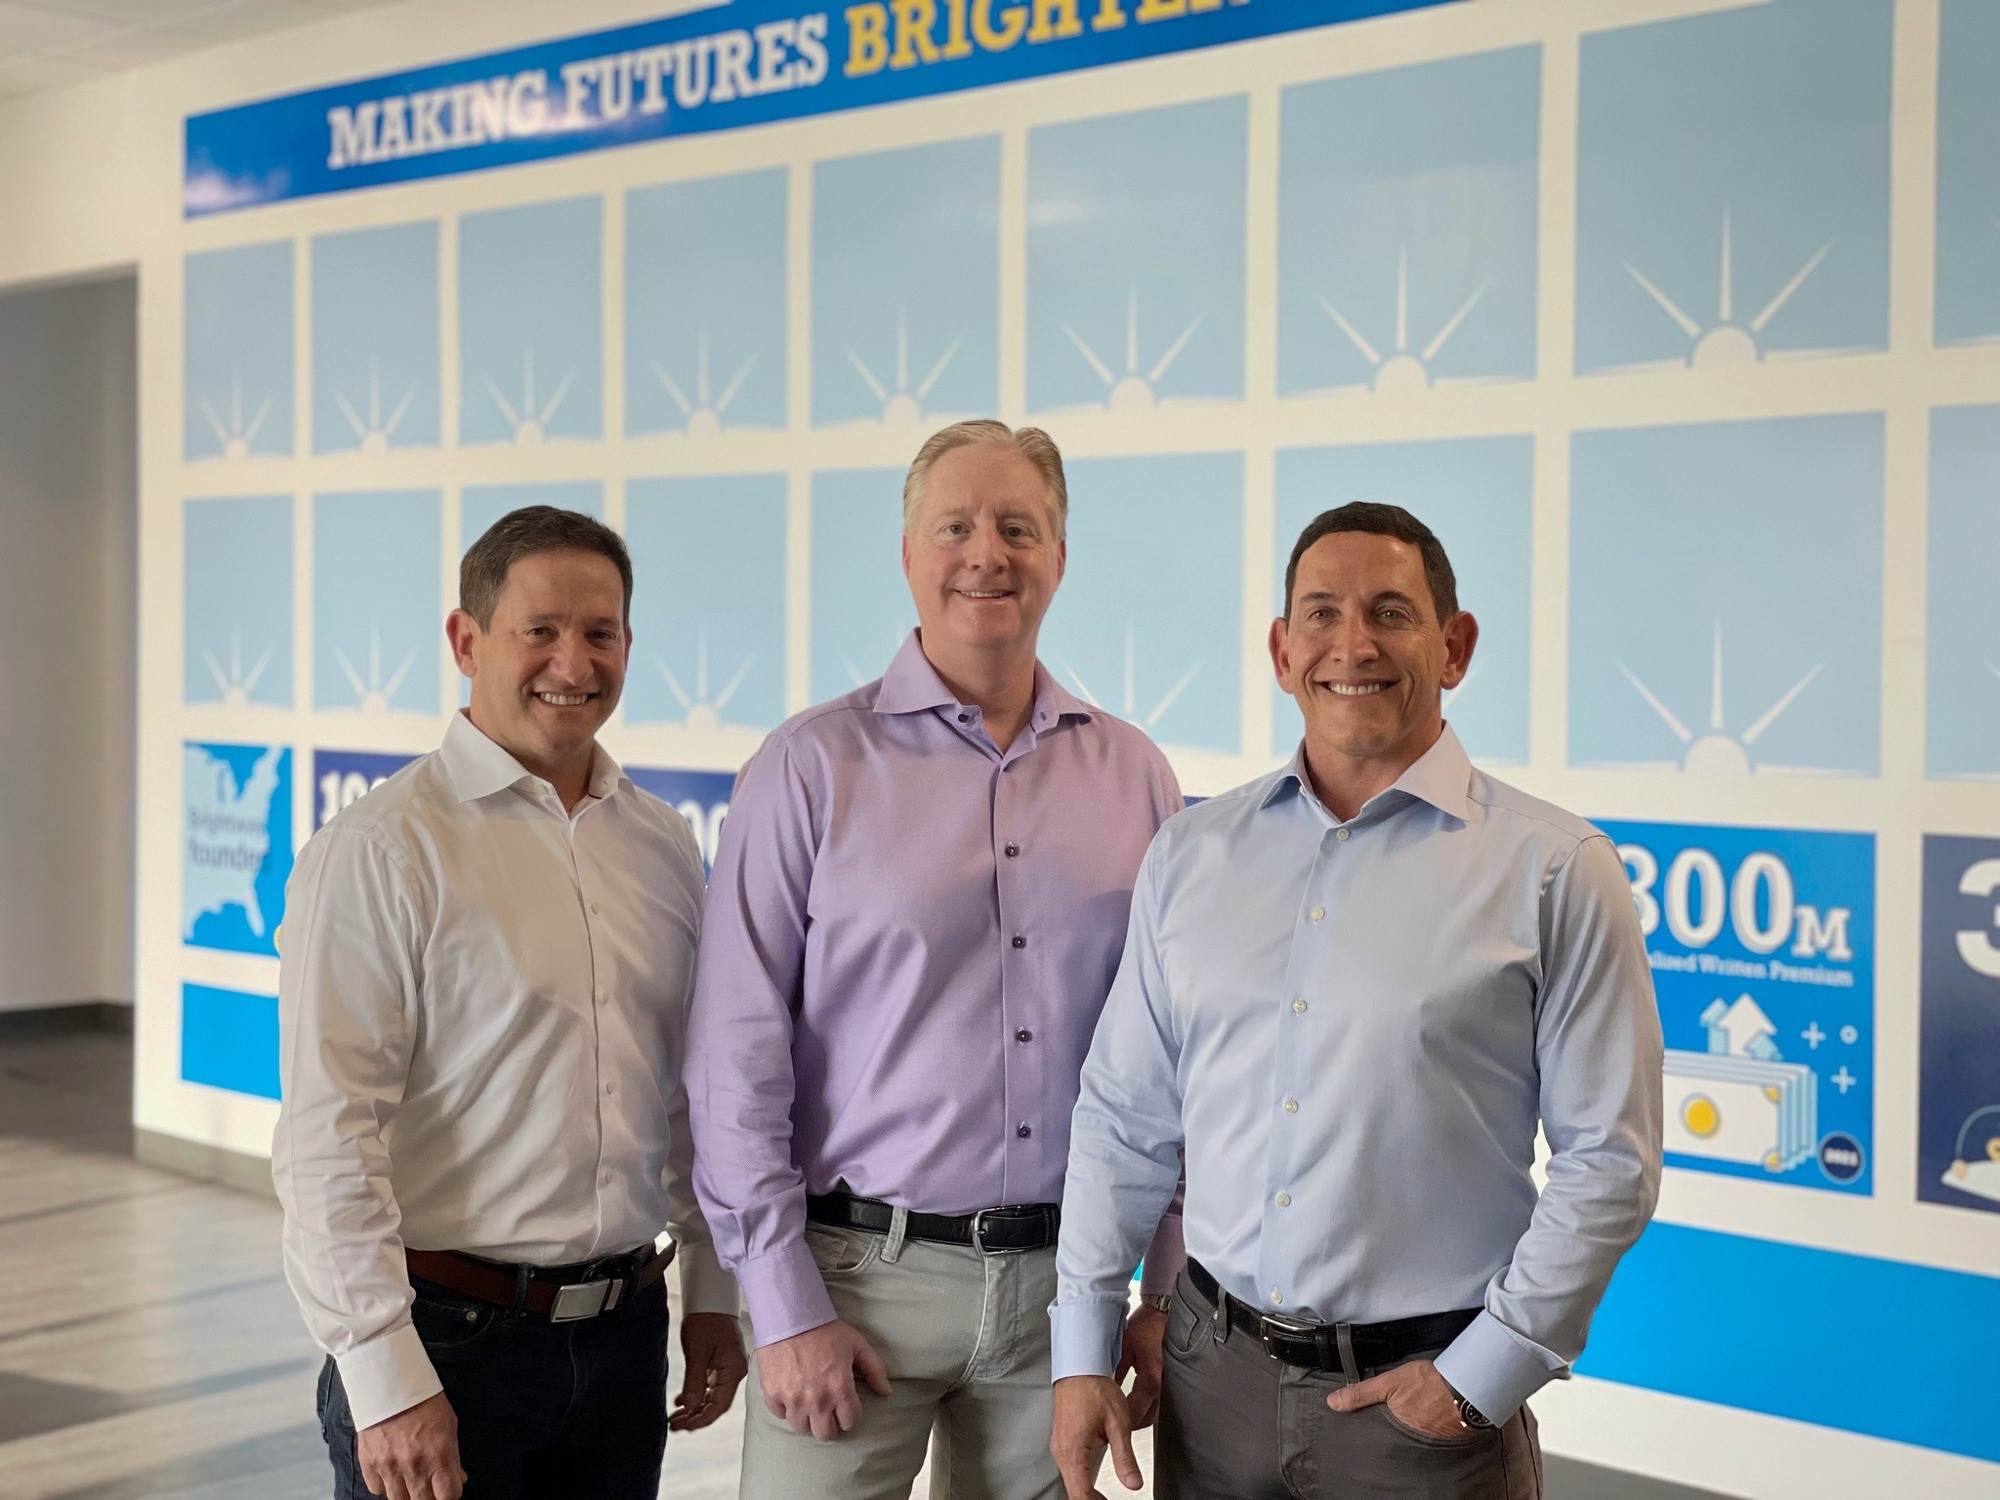 Mark Cantin, center, is the new president and CEO of Brightway Insurance. Cantin met with Brightway co-founders David Miller, left, and Michael Miller at the Brightway Center in Jacksonville.